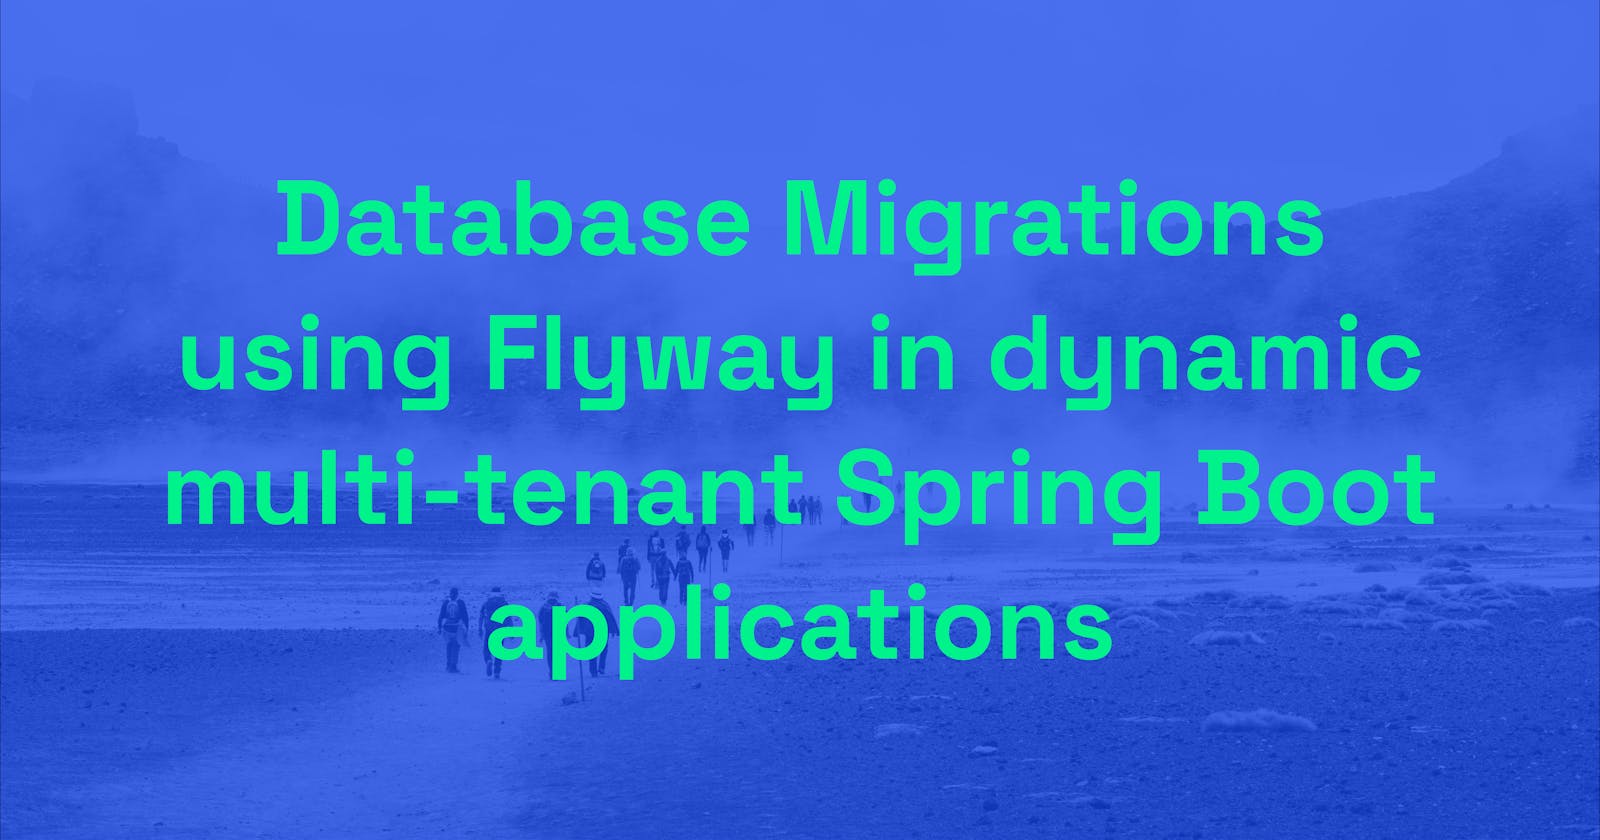 Database Migrations using Flyway in dynamic multi-tenant Spring Boot applications